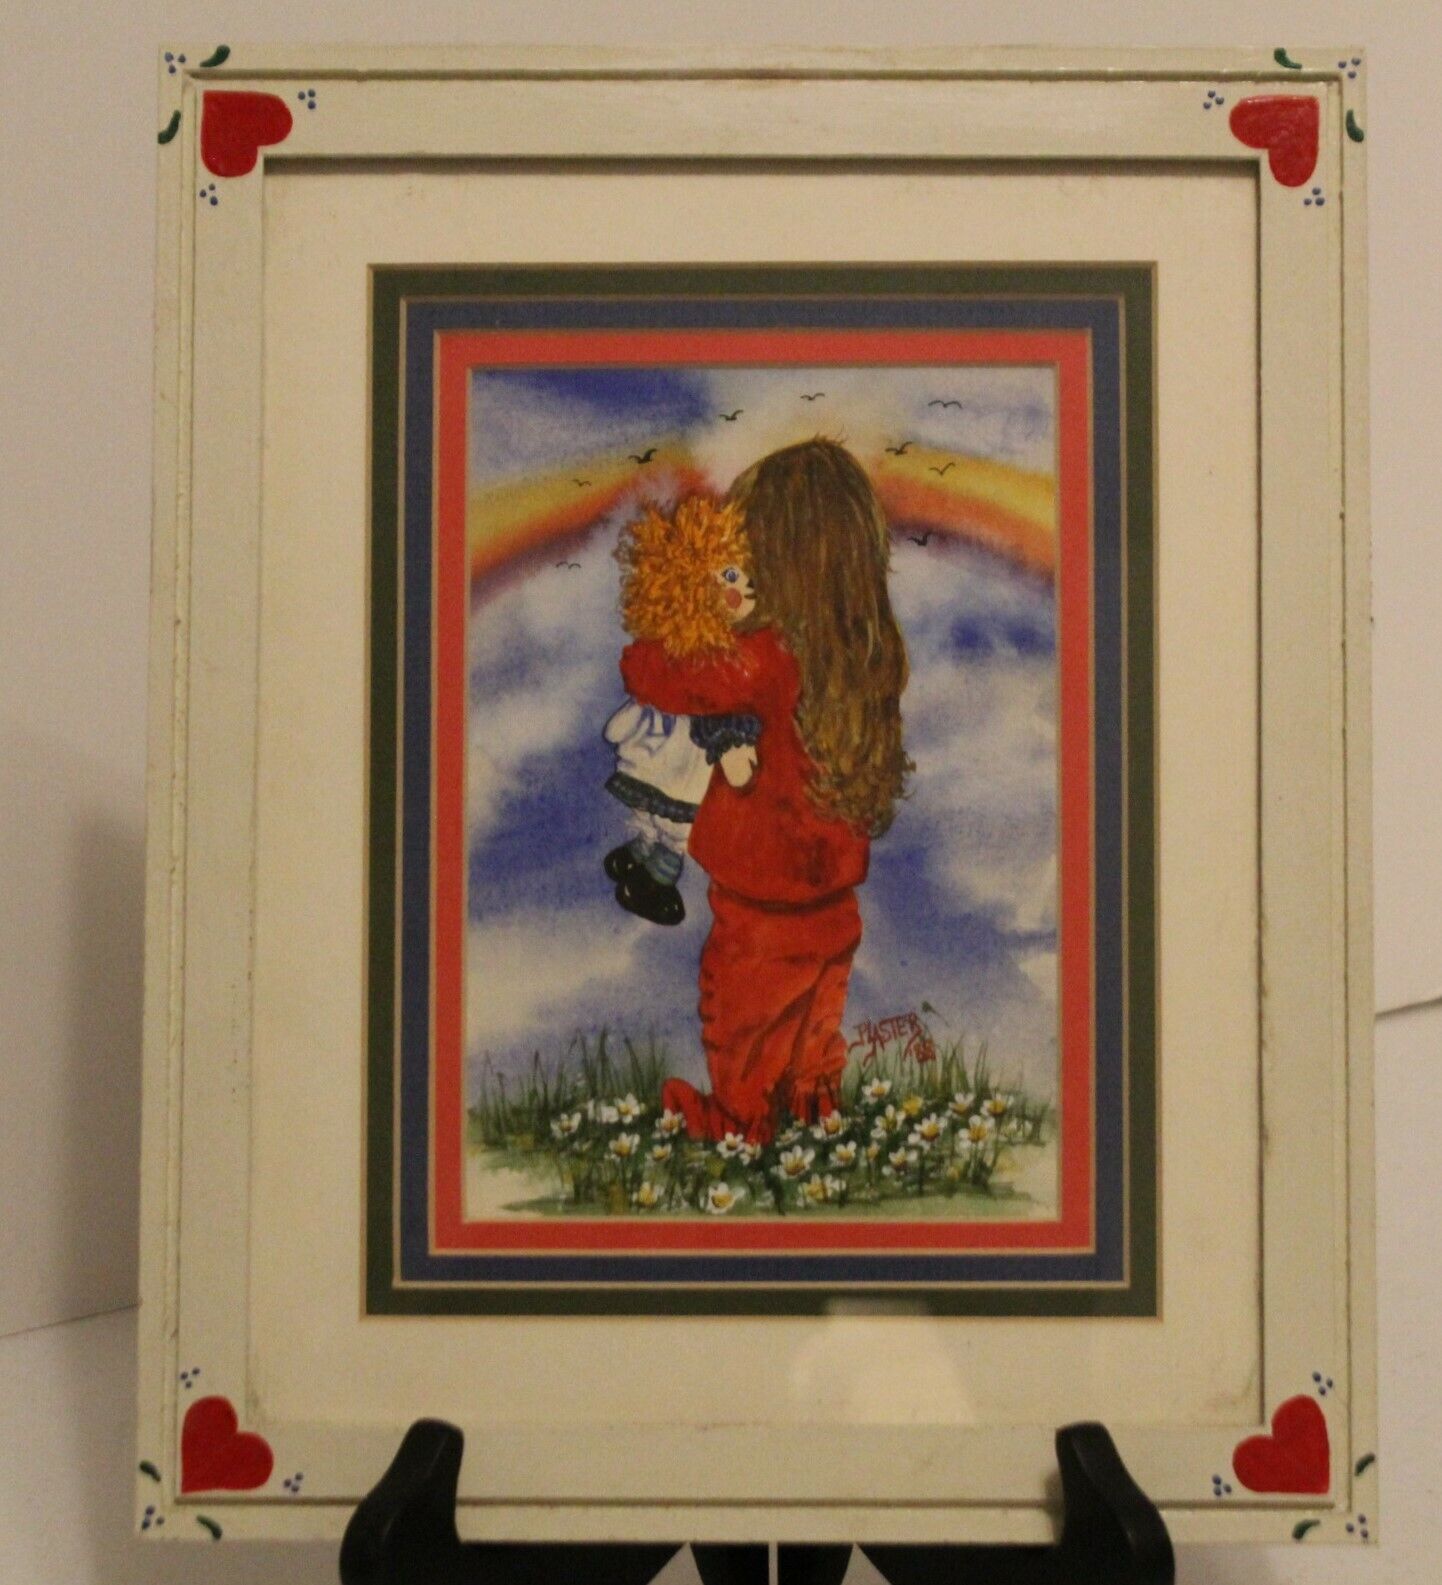 A Child's Faith Prayer by Helen Steiner Rice painting by Pat Plaster